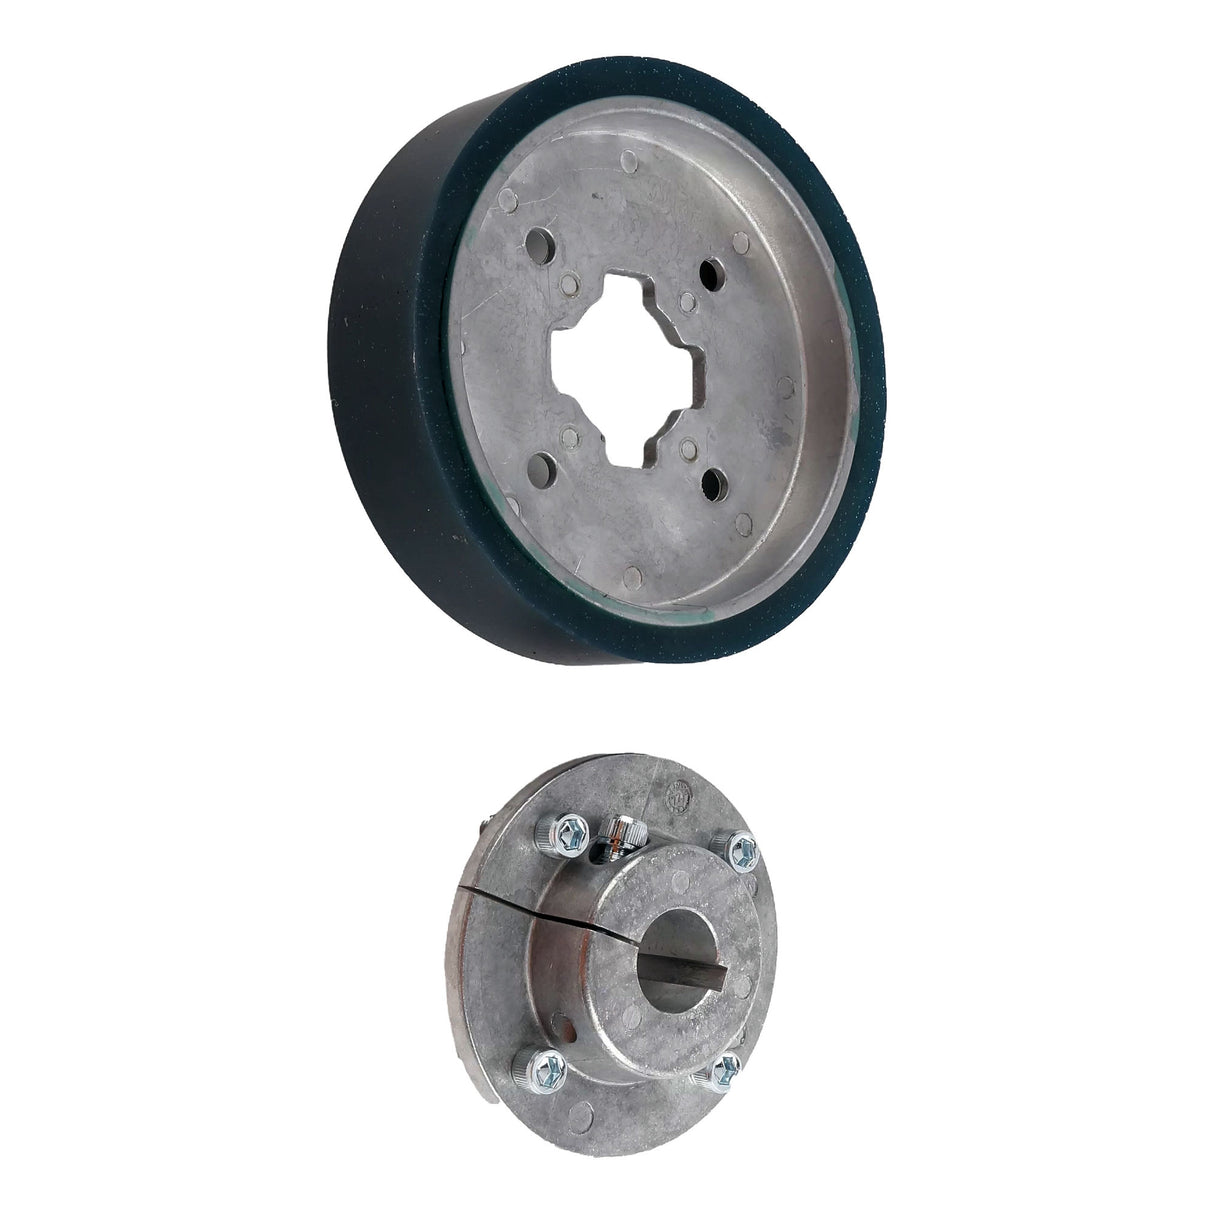 Hysecurity MX002707 wheel (parts showing)